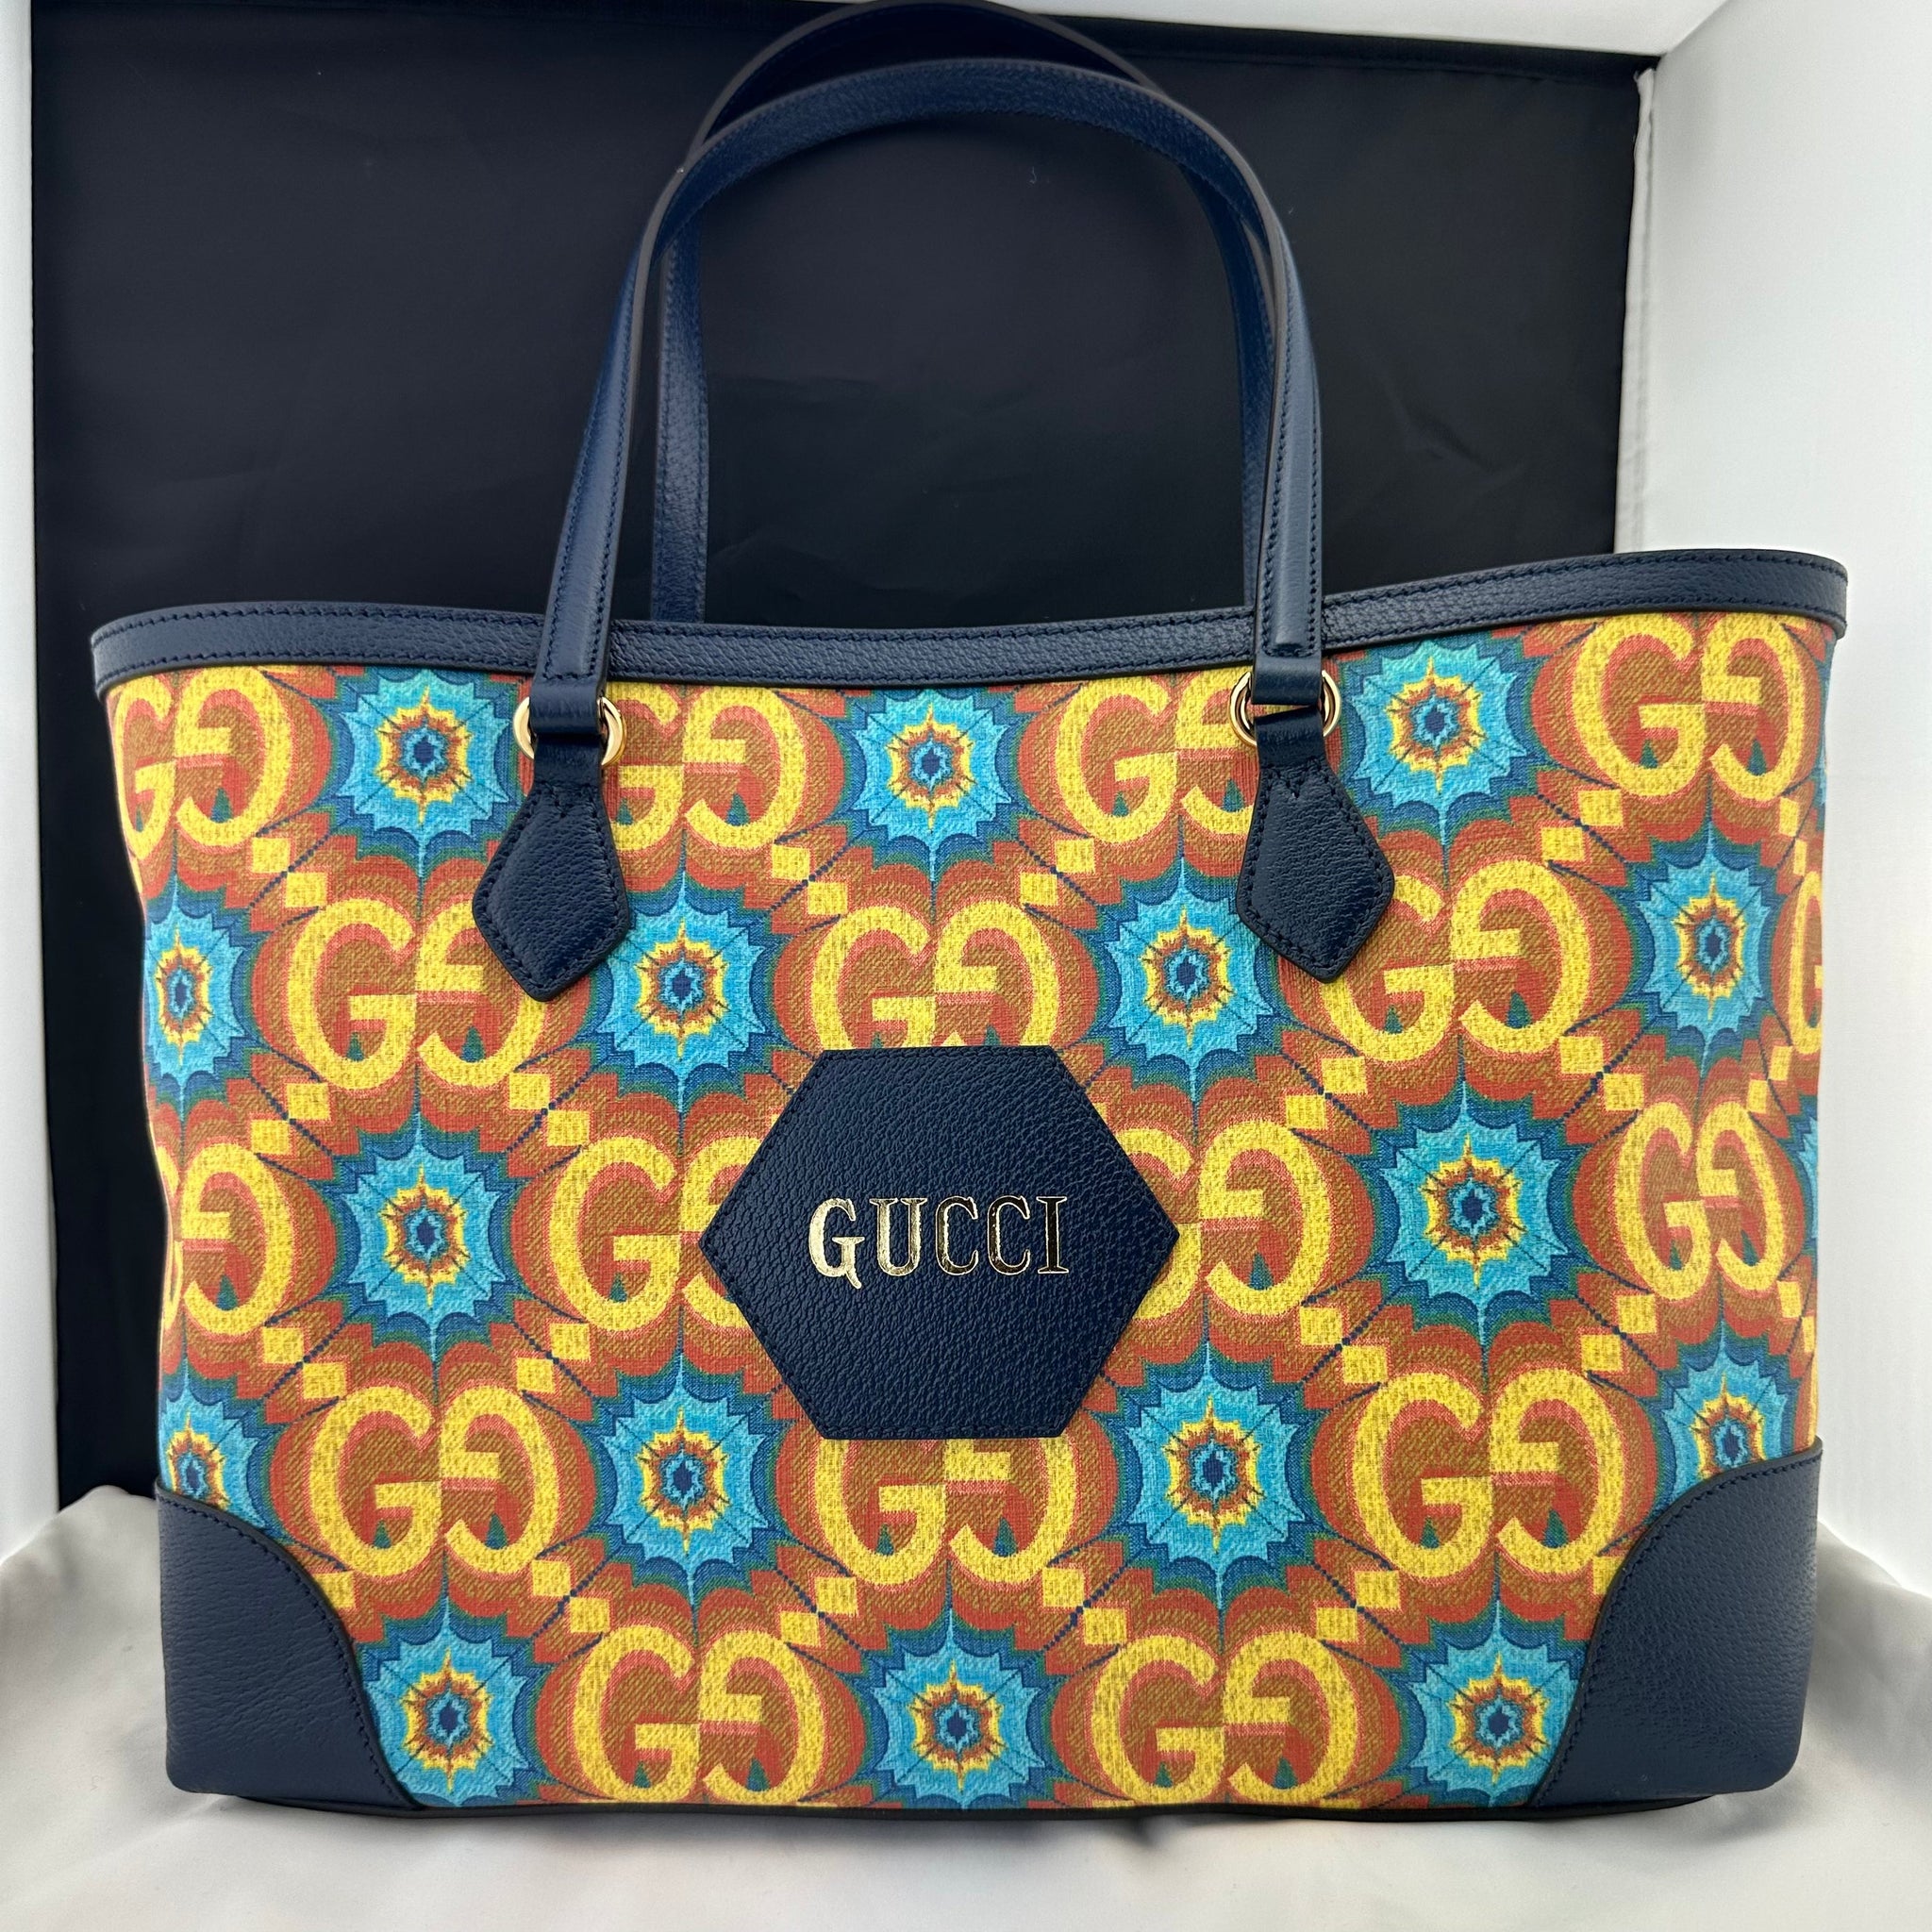 Why Gucci Monogram Bags Are Worth the Money